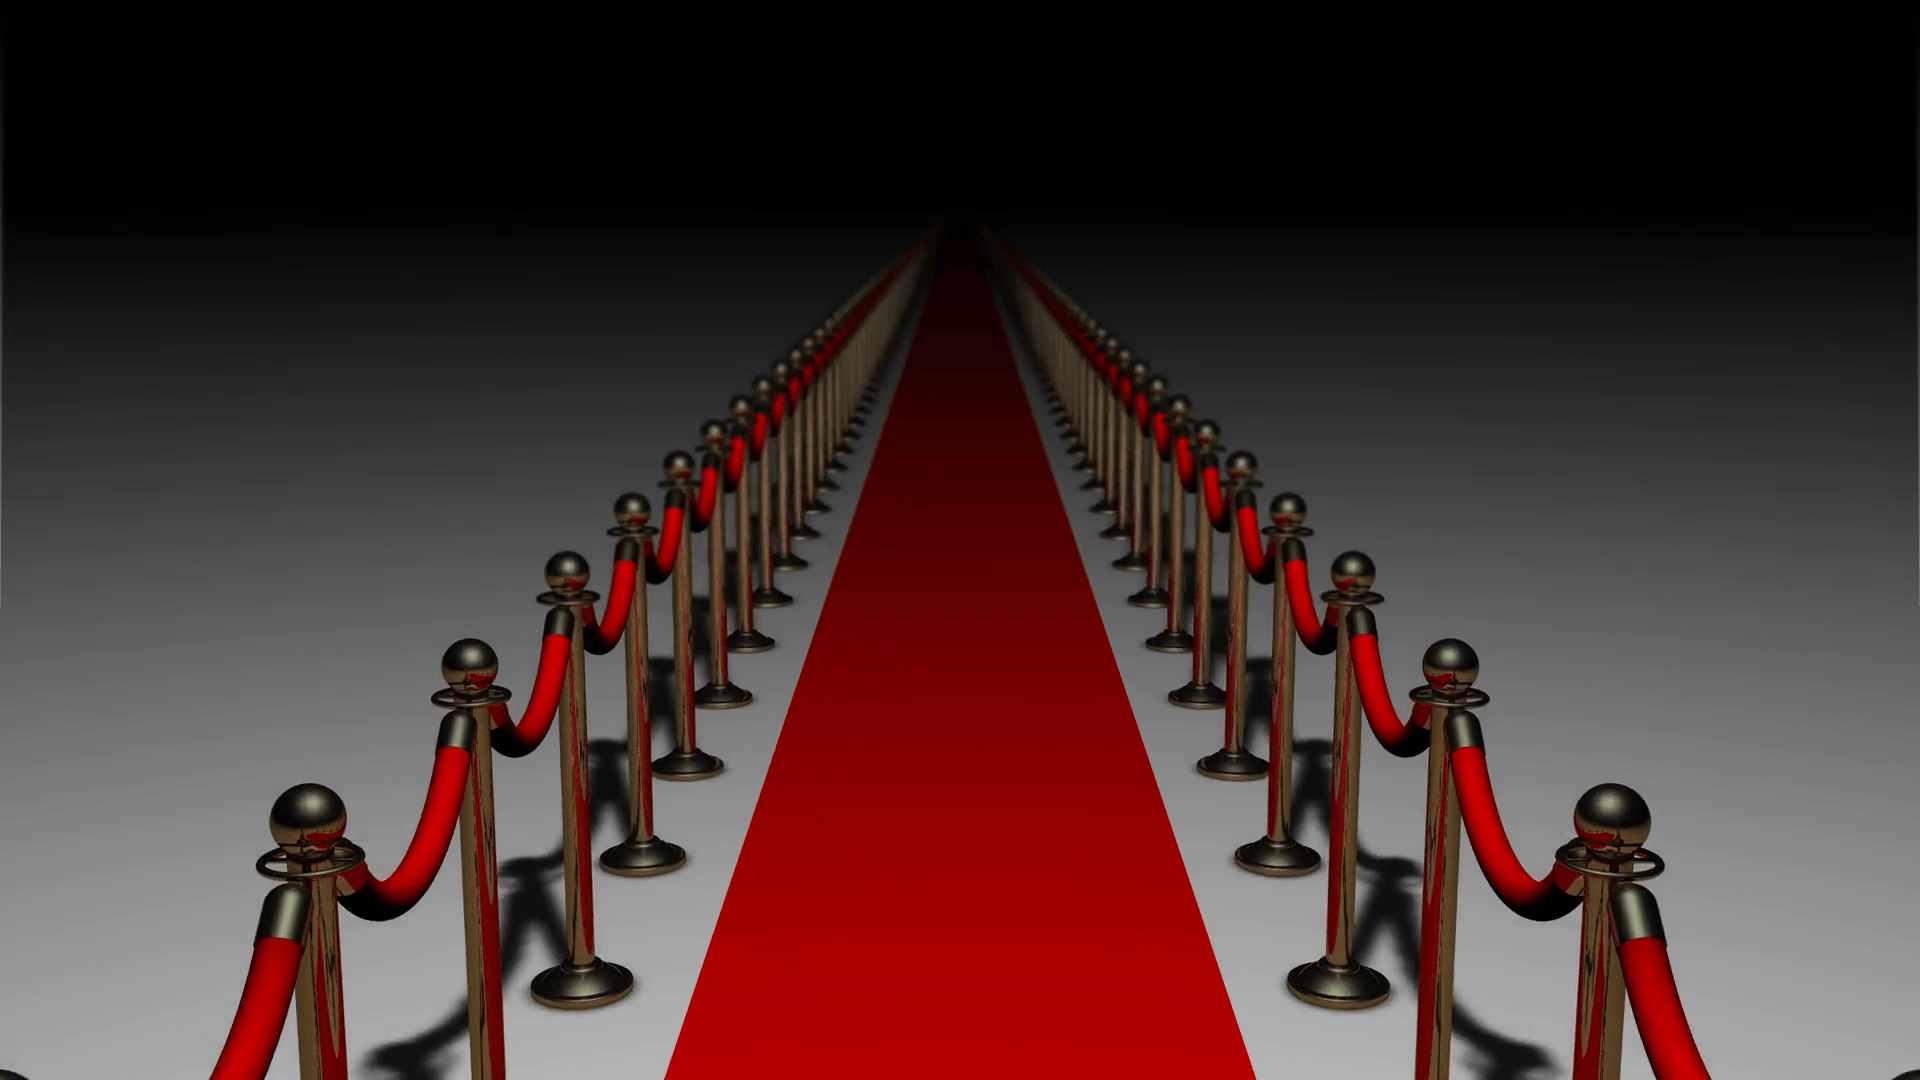 Red carpet background creative imagepicture free download  500918224lovepikcom